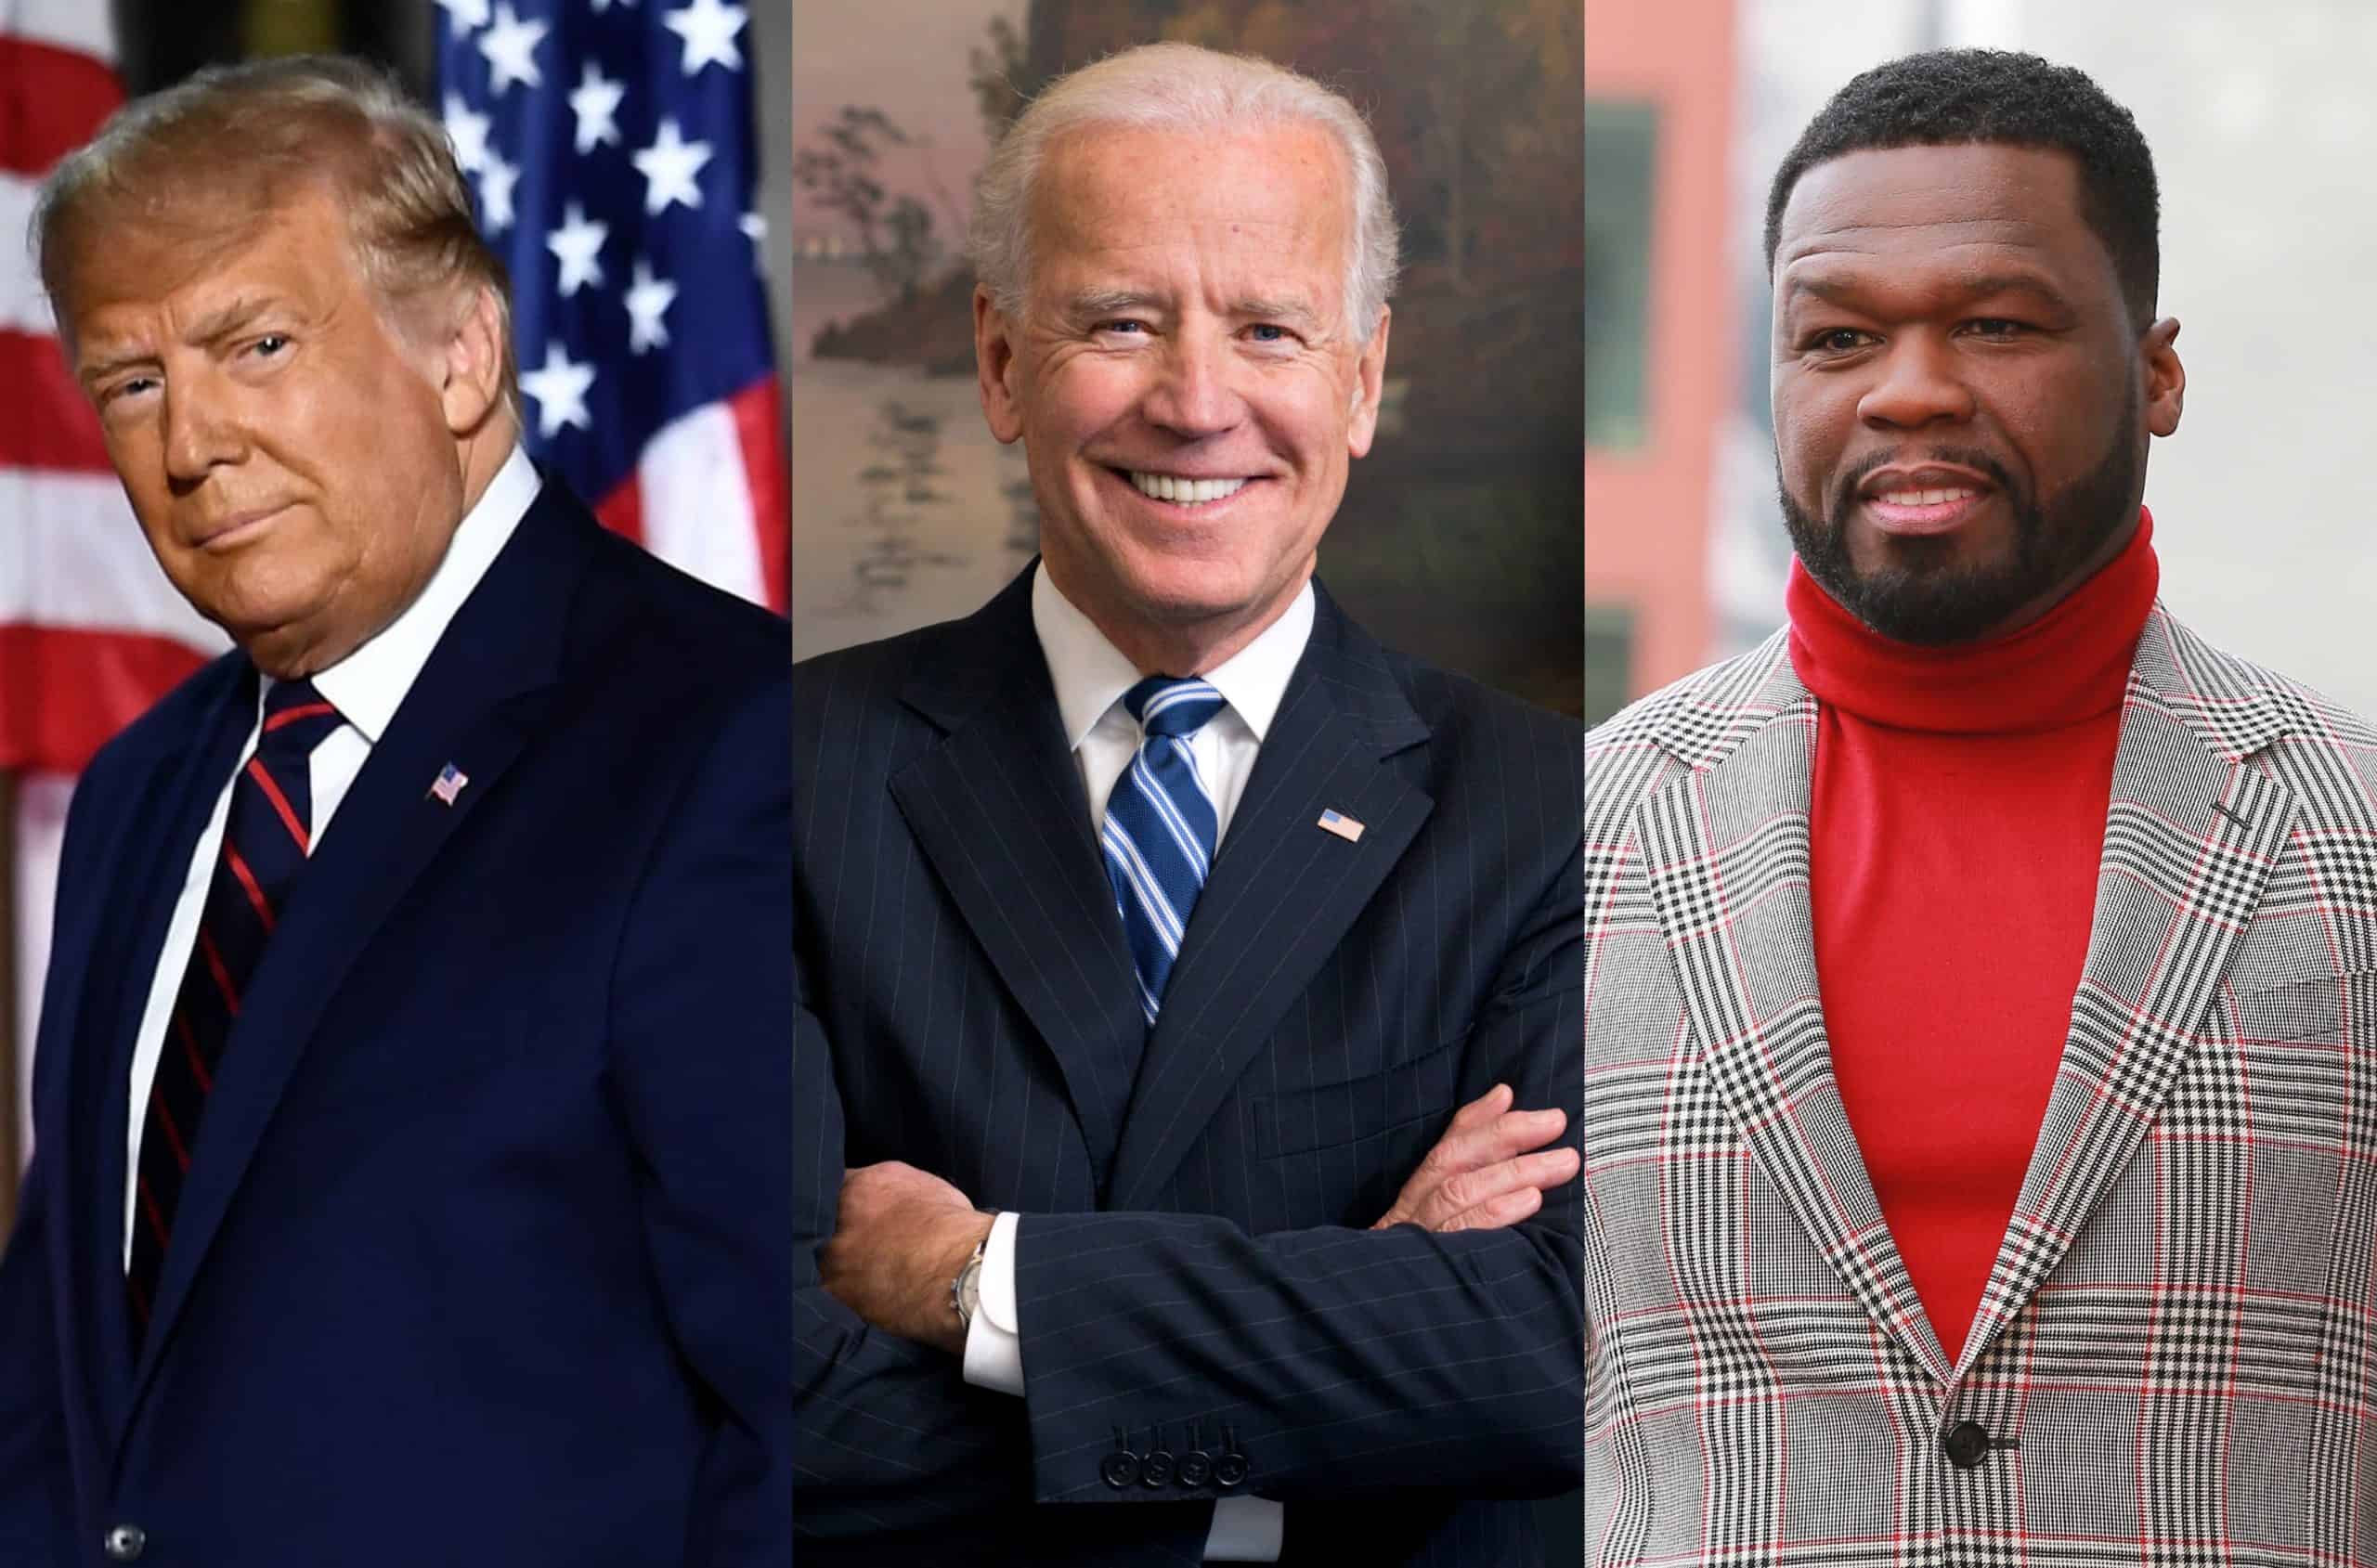 50 Cent Says Vote For Trump After Joe Biden Announced his Tax Plan